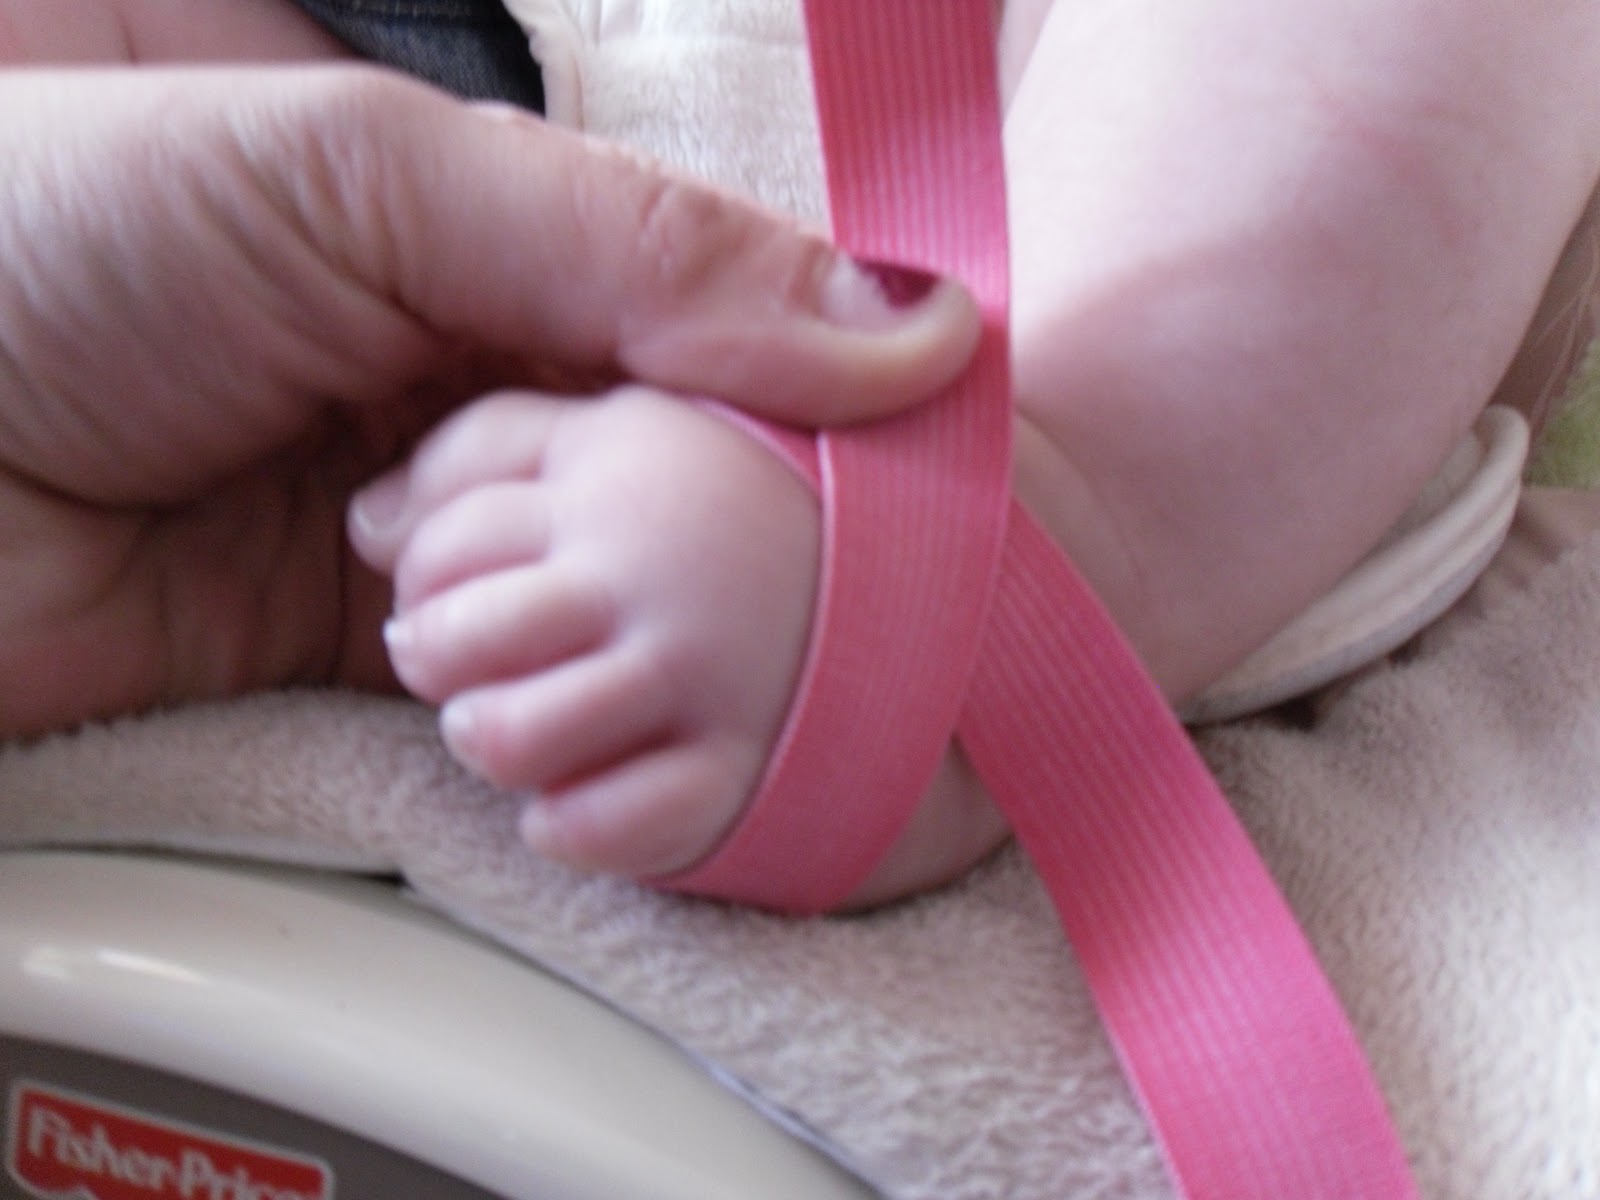 If you have your babies foot available, fit the elastic to their